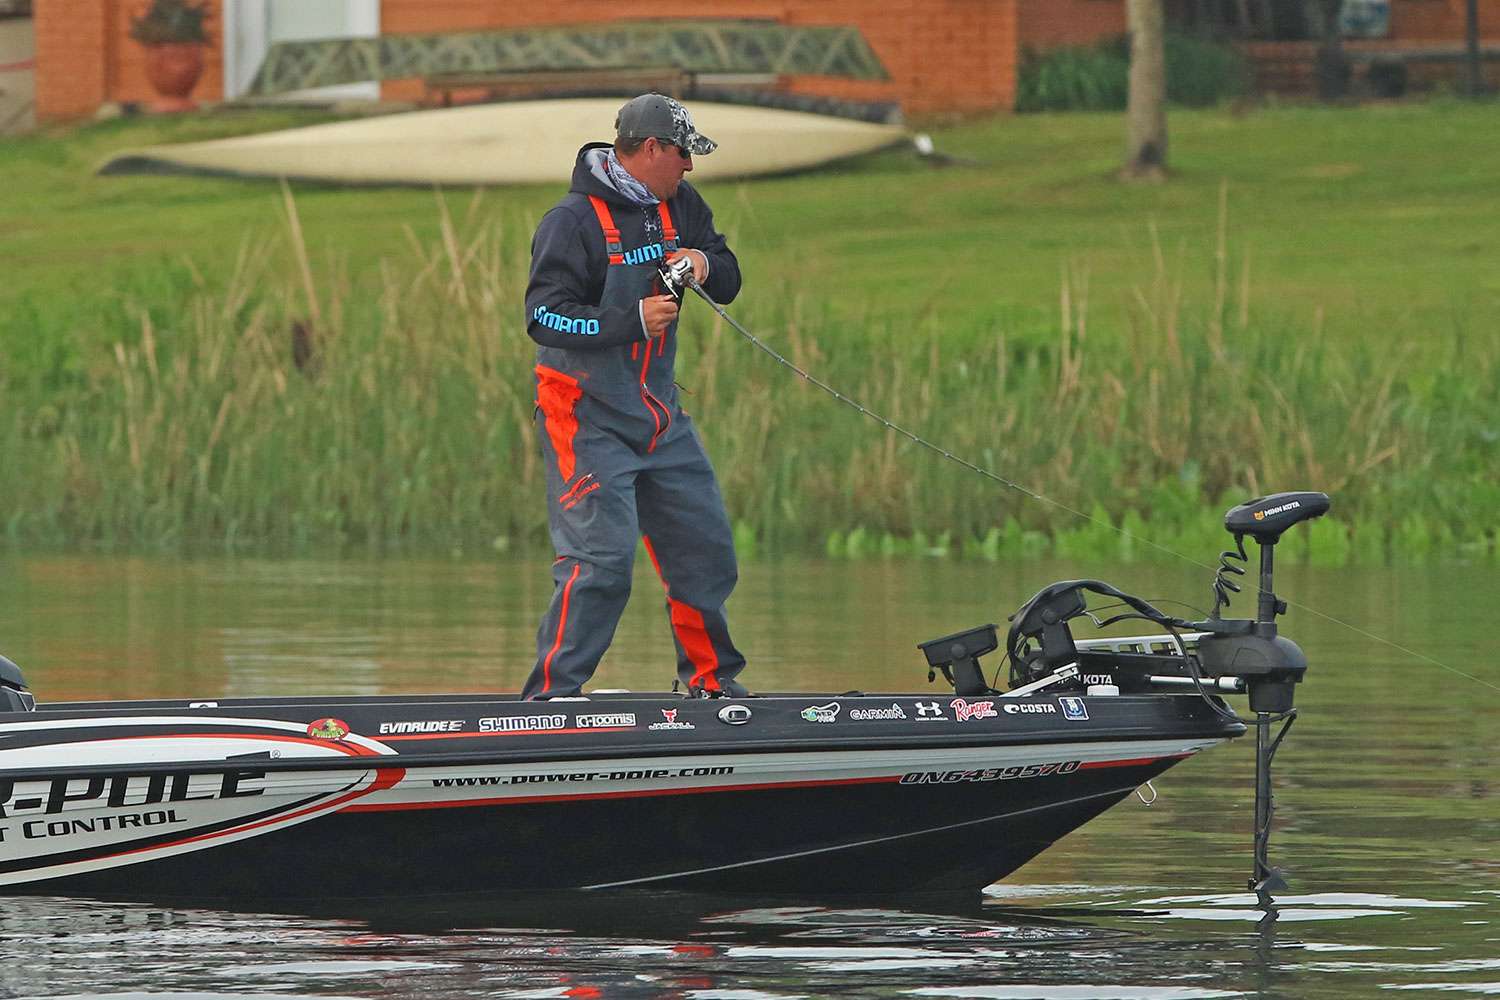 Take a look at a fast and furious day of catching during Day 3 of the 2019 Bass Pro Shops Bassmaster Elite at Winyah Bay with Bassmaster Elite Series anglers and brothers Cory and Chris Johnston.